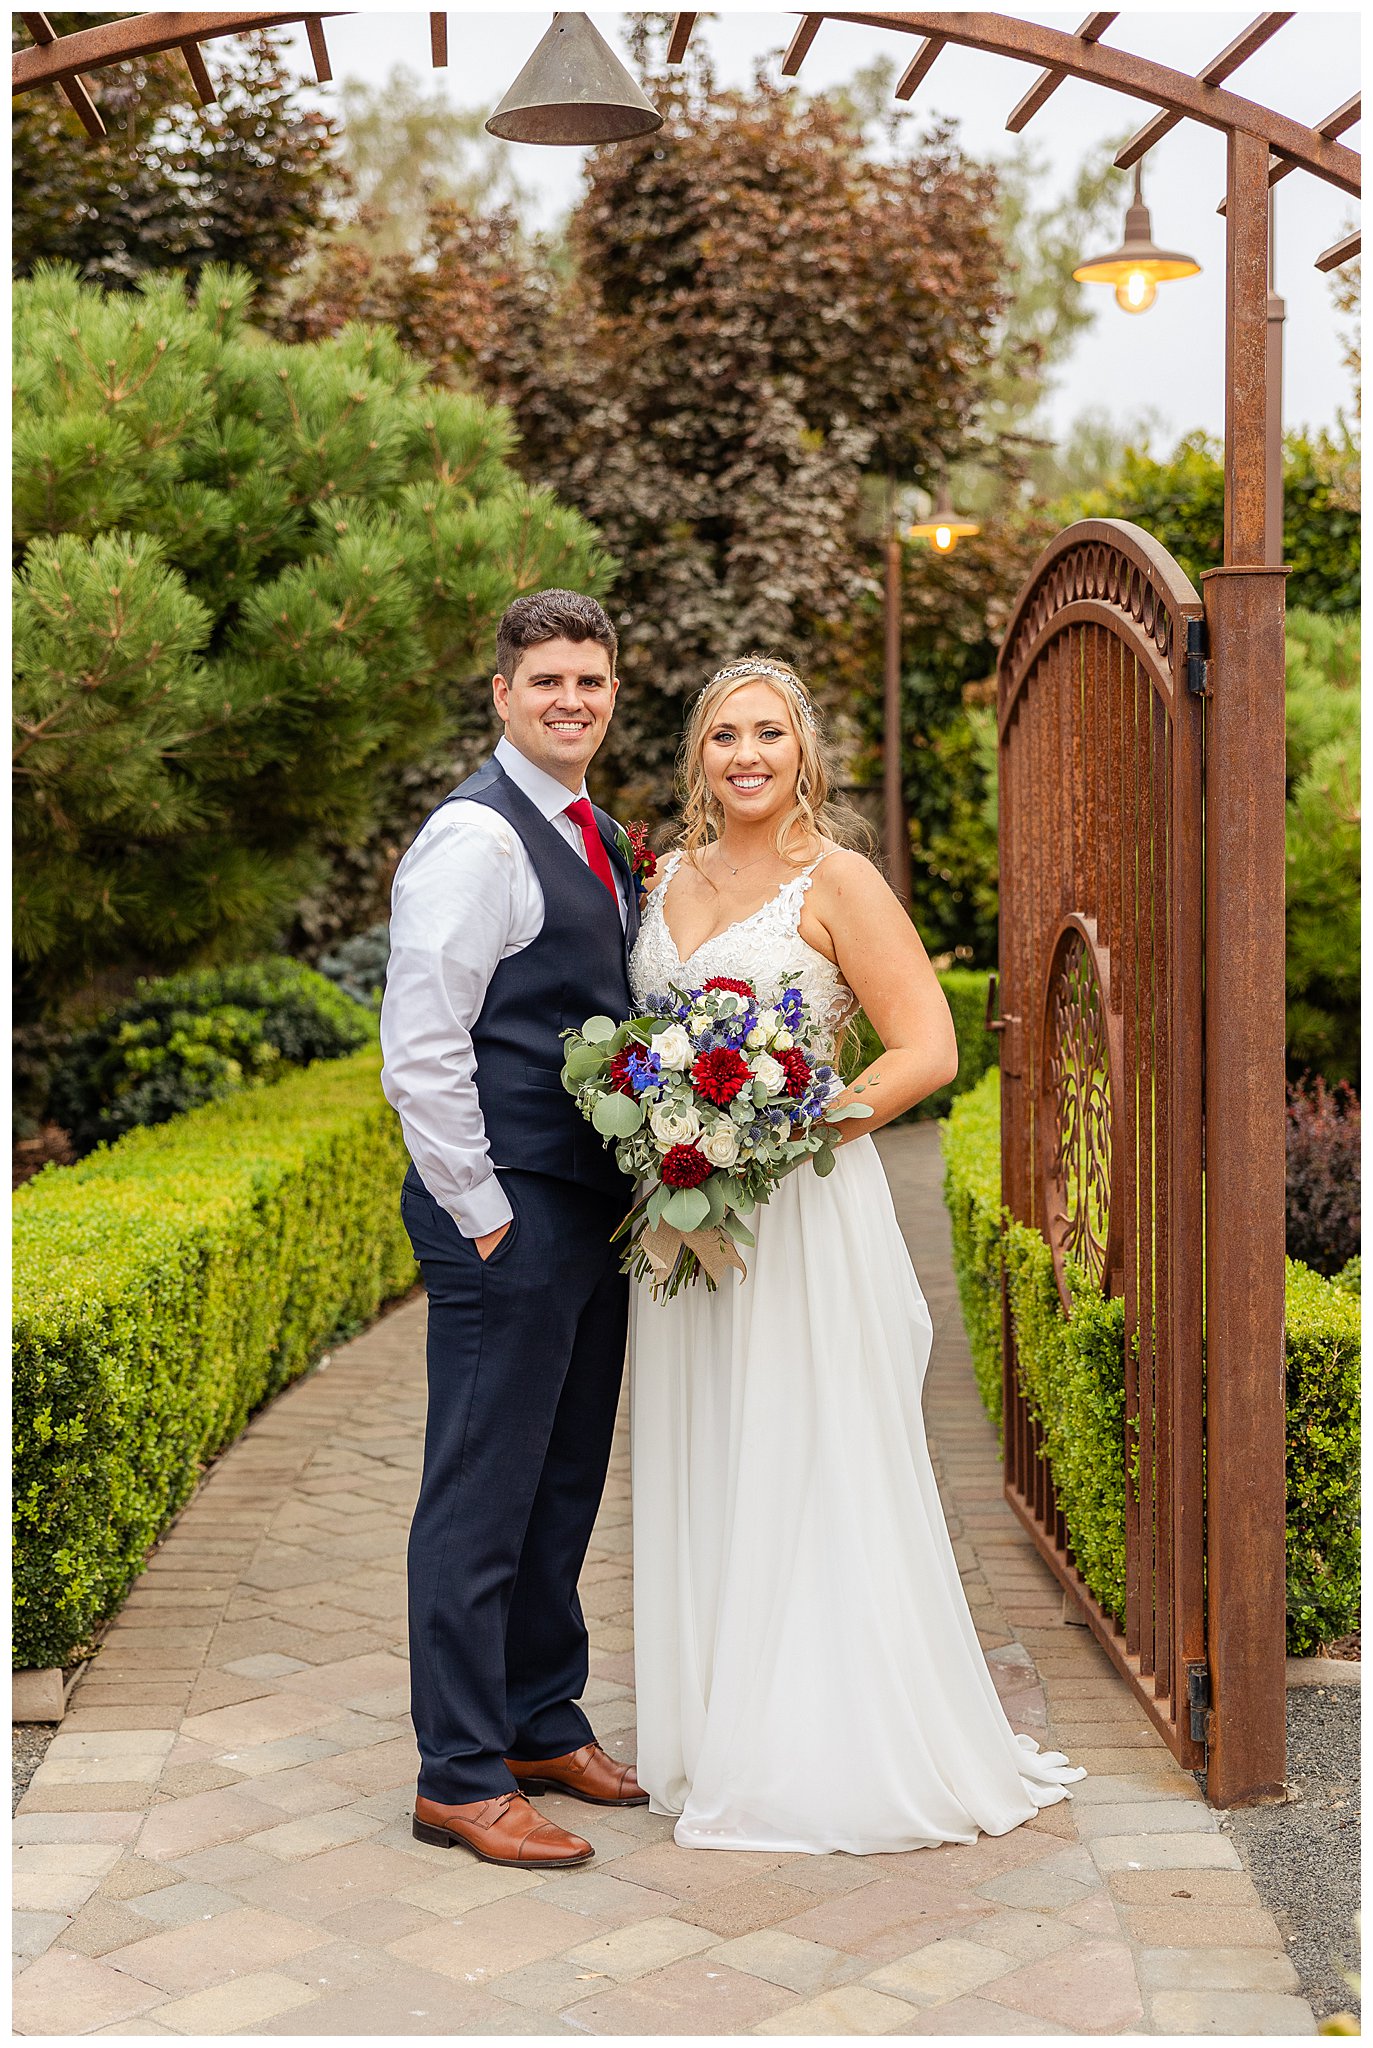 First Look Wedding at the Irongate Garden Inn in Chico CA | Danielle + Luke